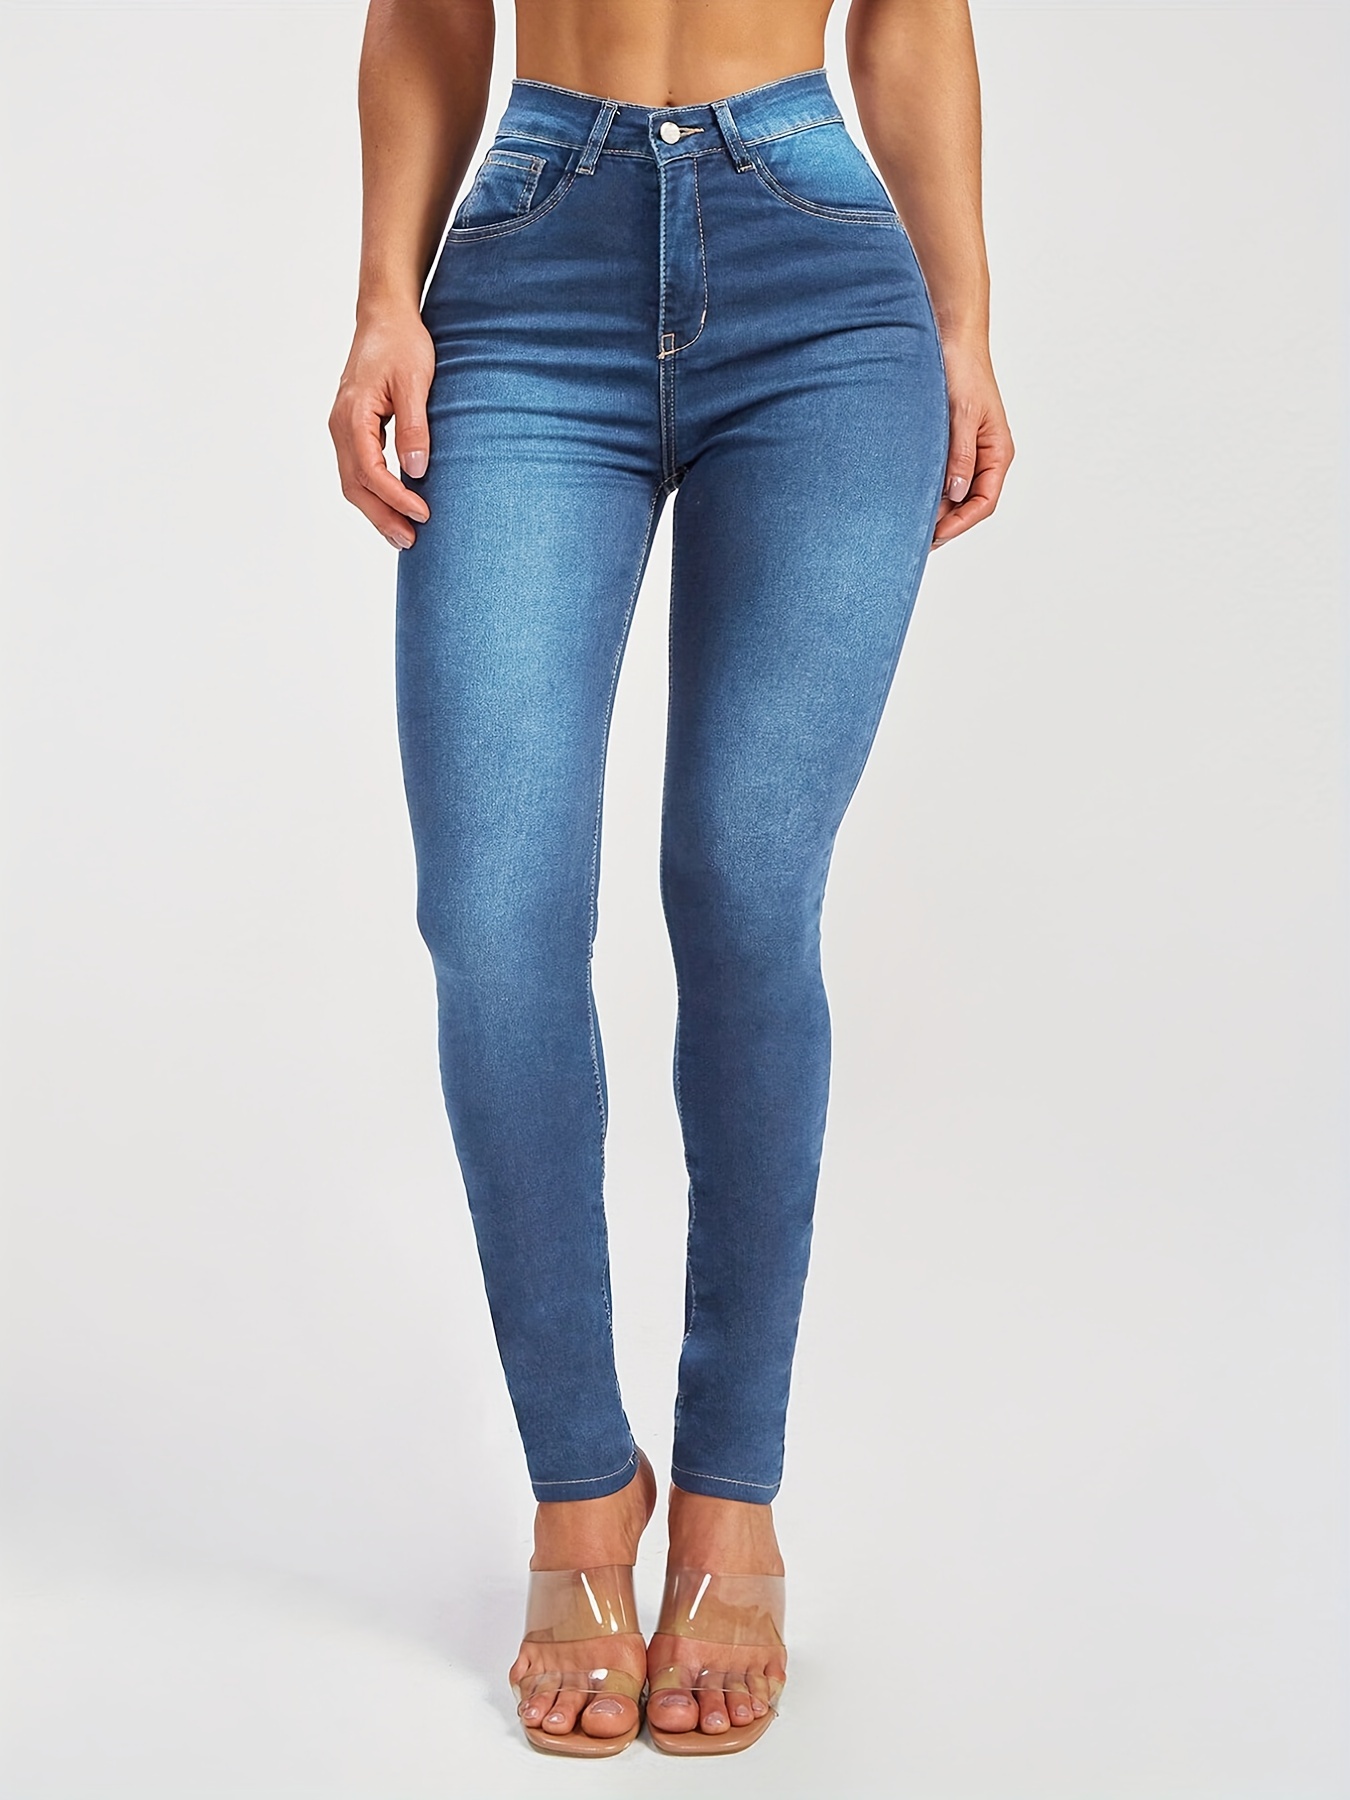 Skinny Very Stretchy High Rise Dark Wash Gap Proof Jeans BloomChic